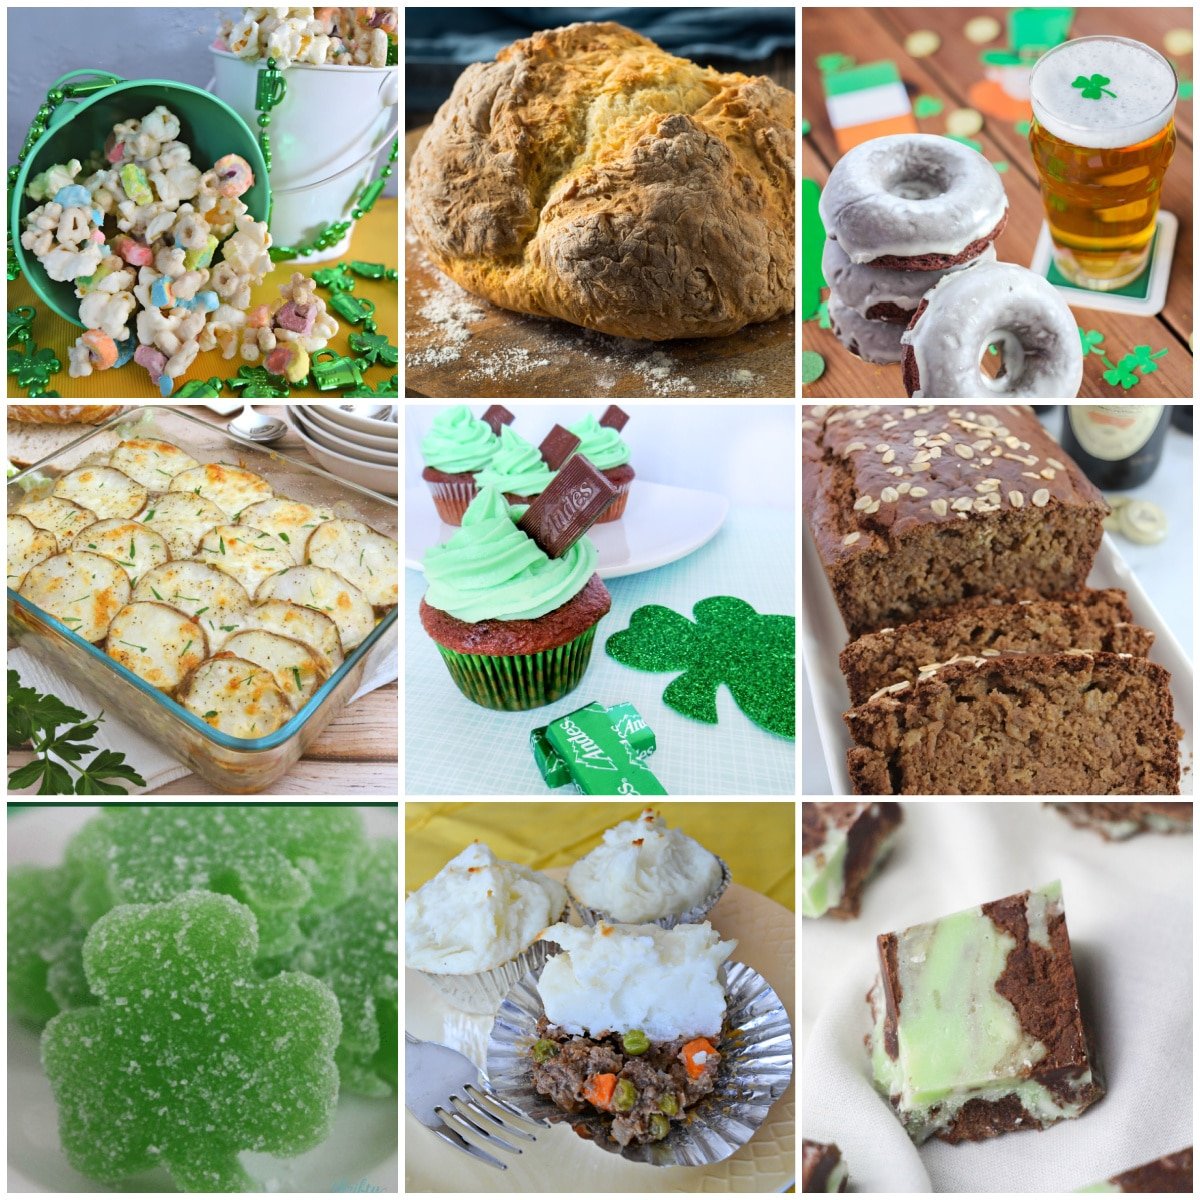 Collage of 9 St. Patrick's Day foods including Irish Soda Bread, chocolate mint desserts and others.